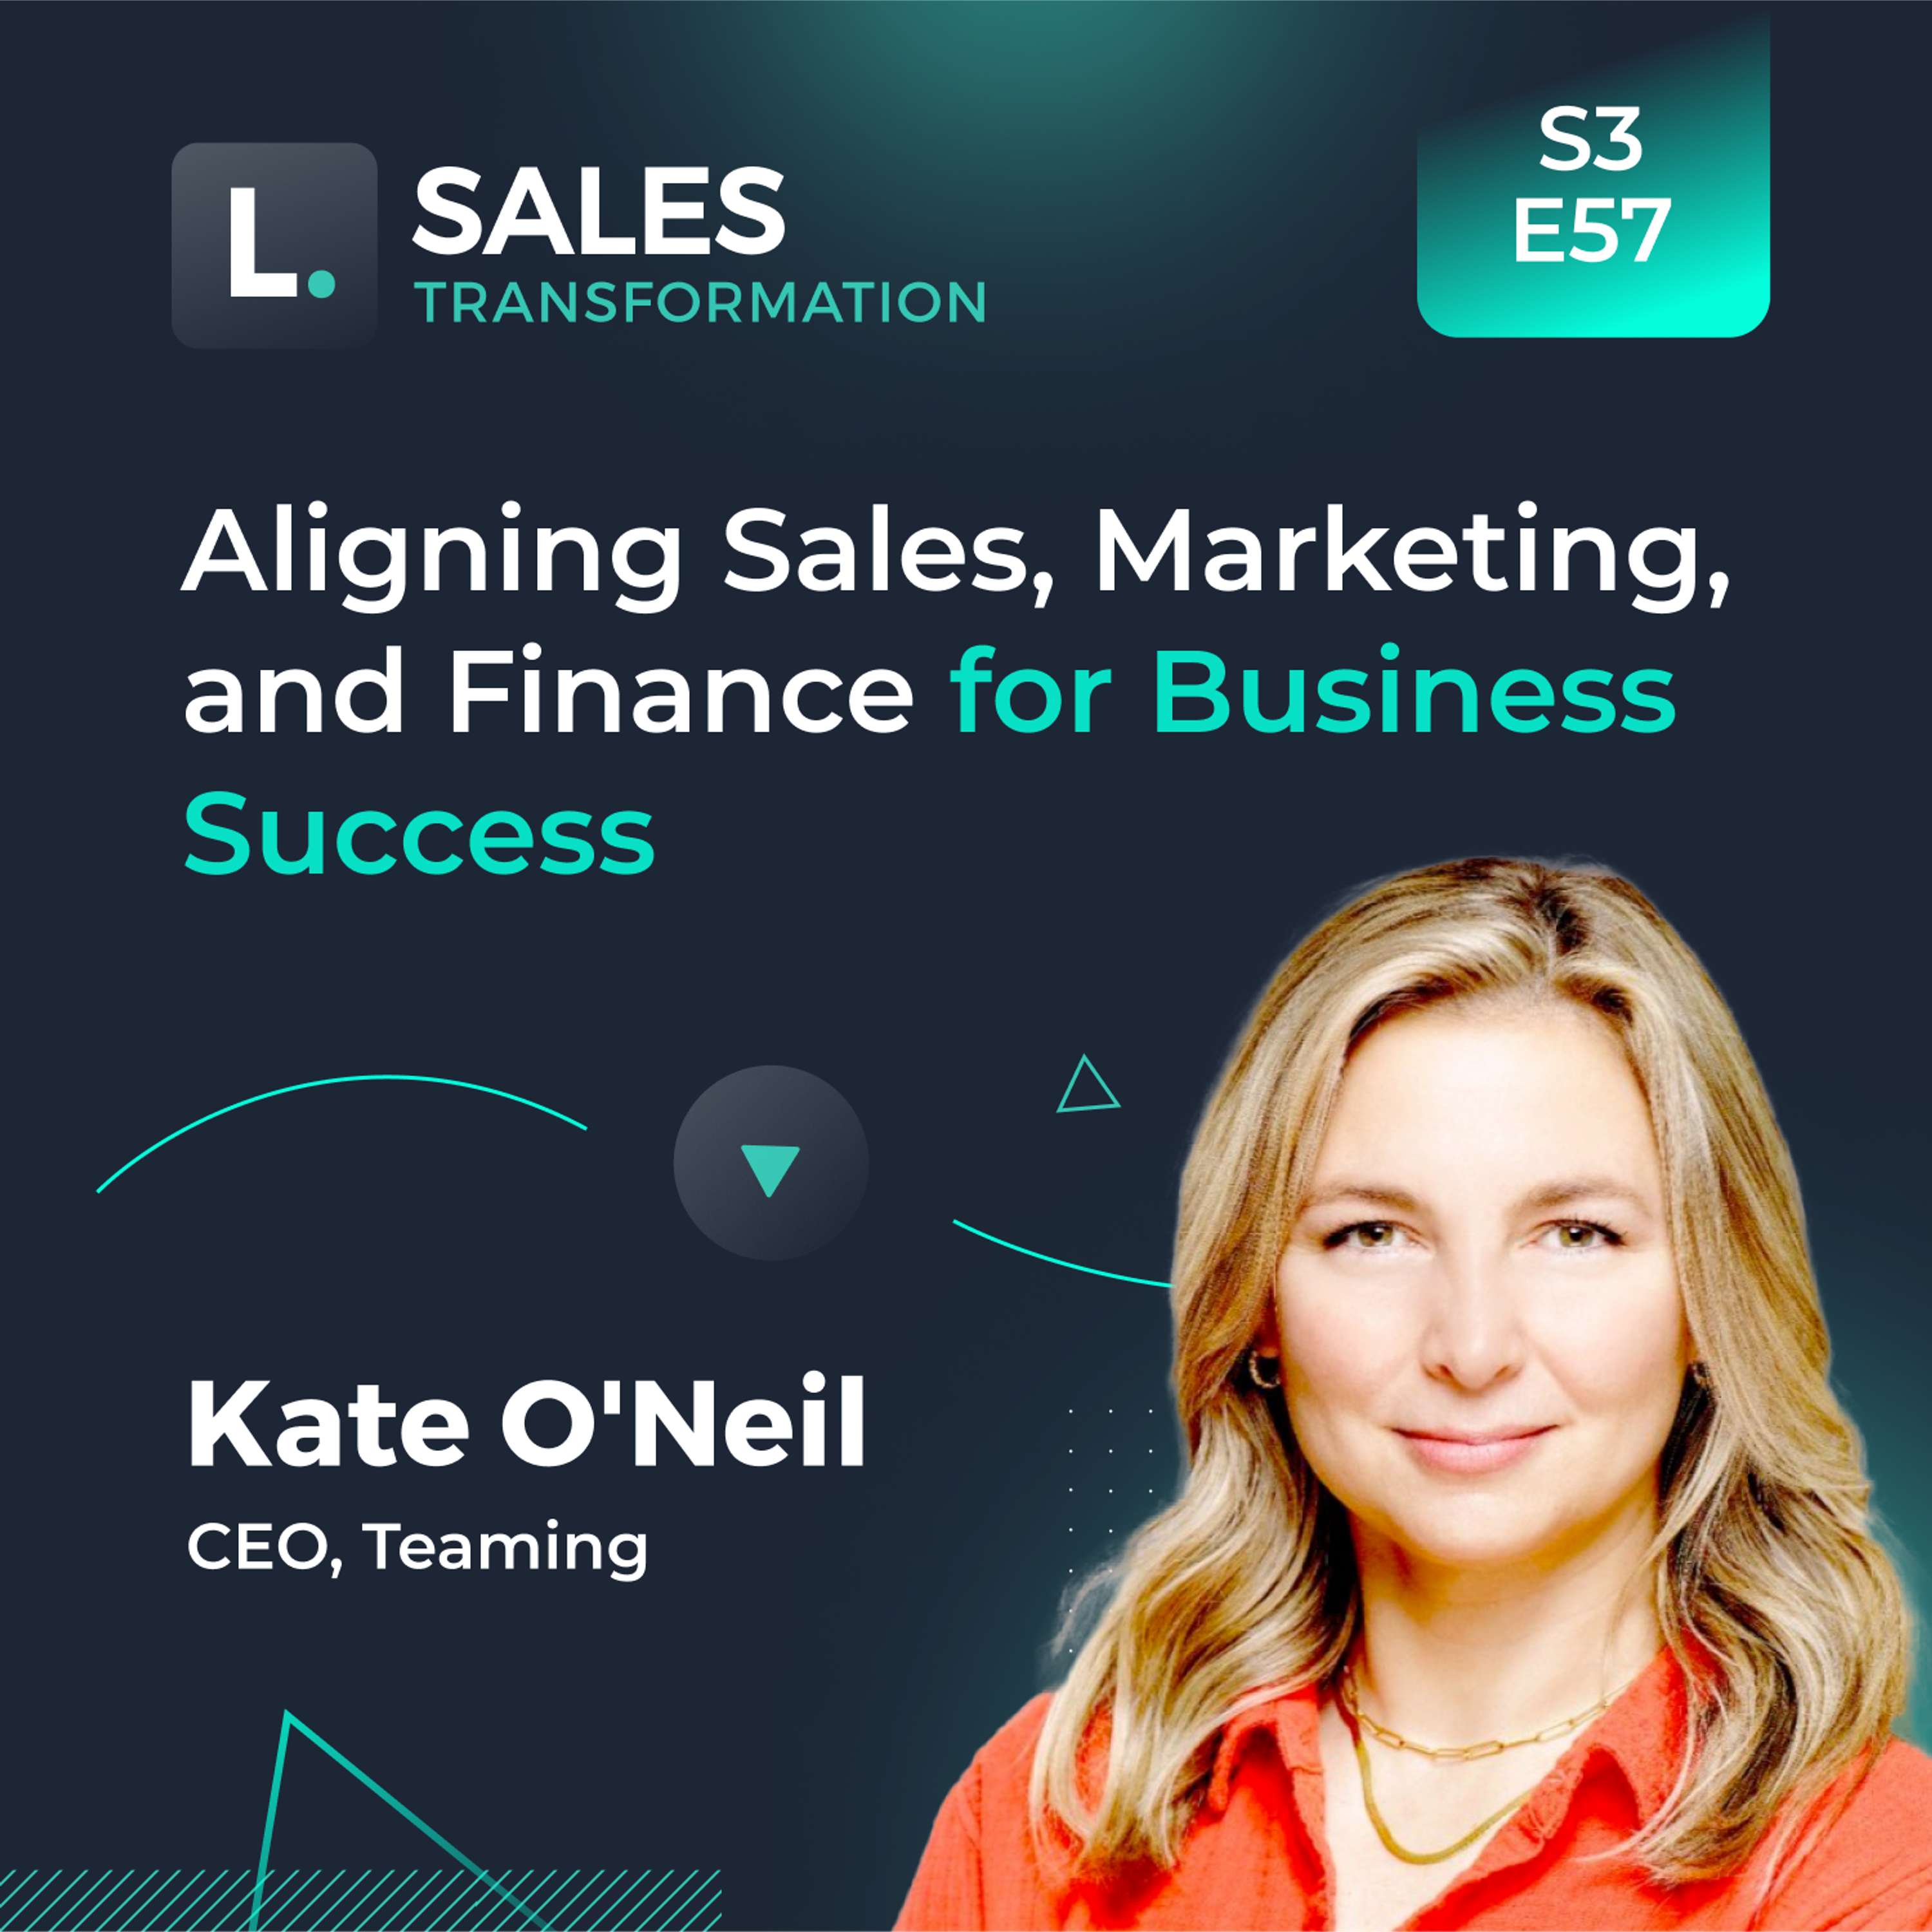 731 - Aligning Sales, Marketing, and Finance for Business Success, with Kate O’Neil